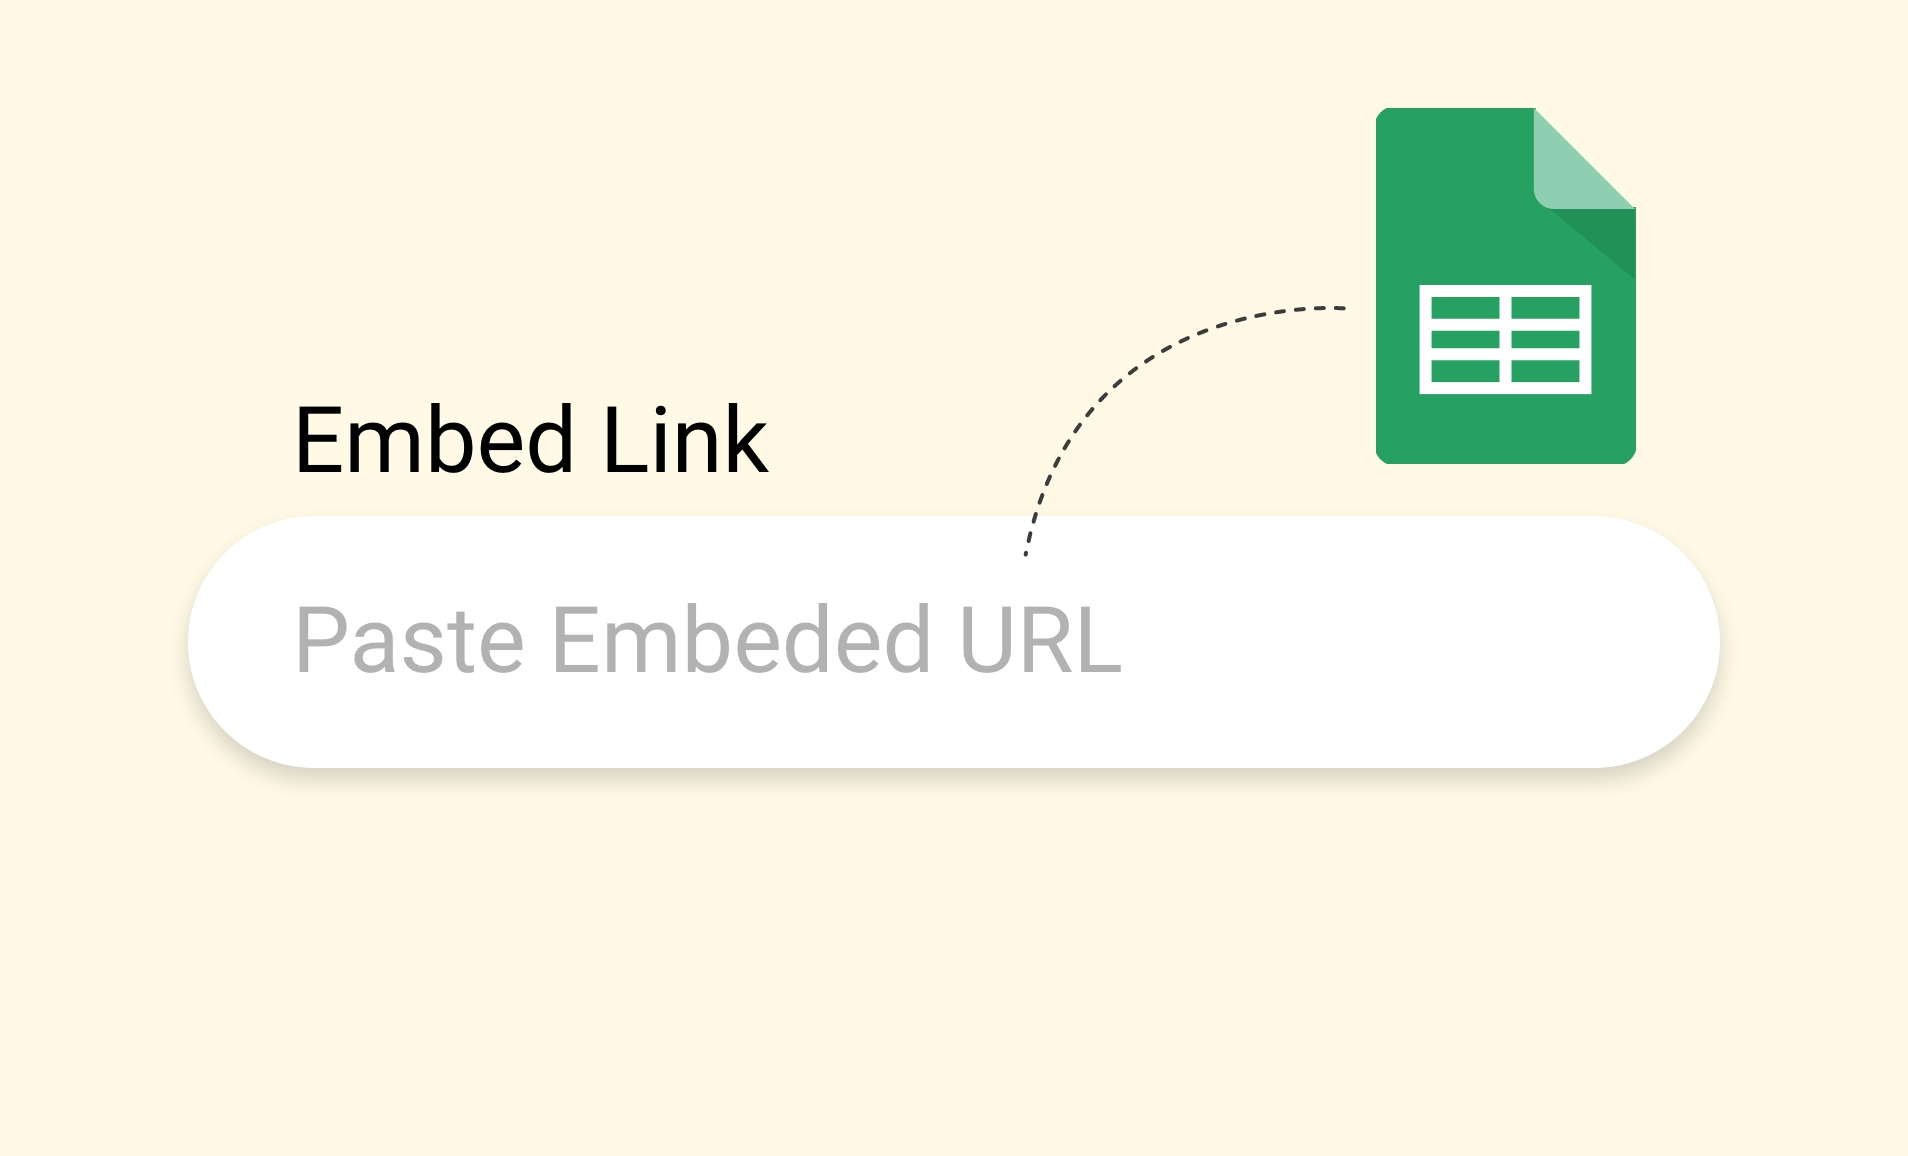 Digital signage Google Sheets app interface with the option to paste embed url from google sheets.